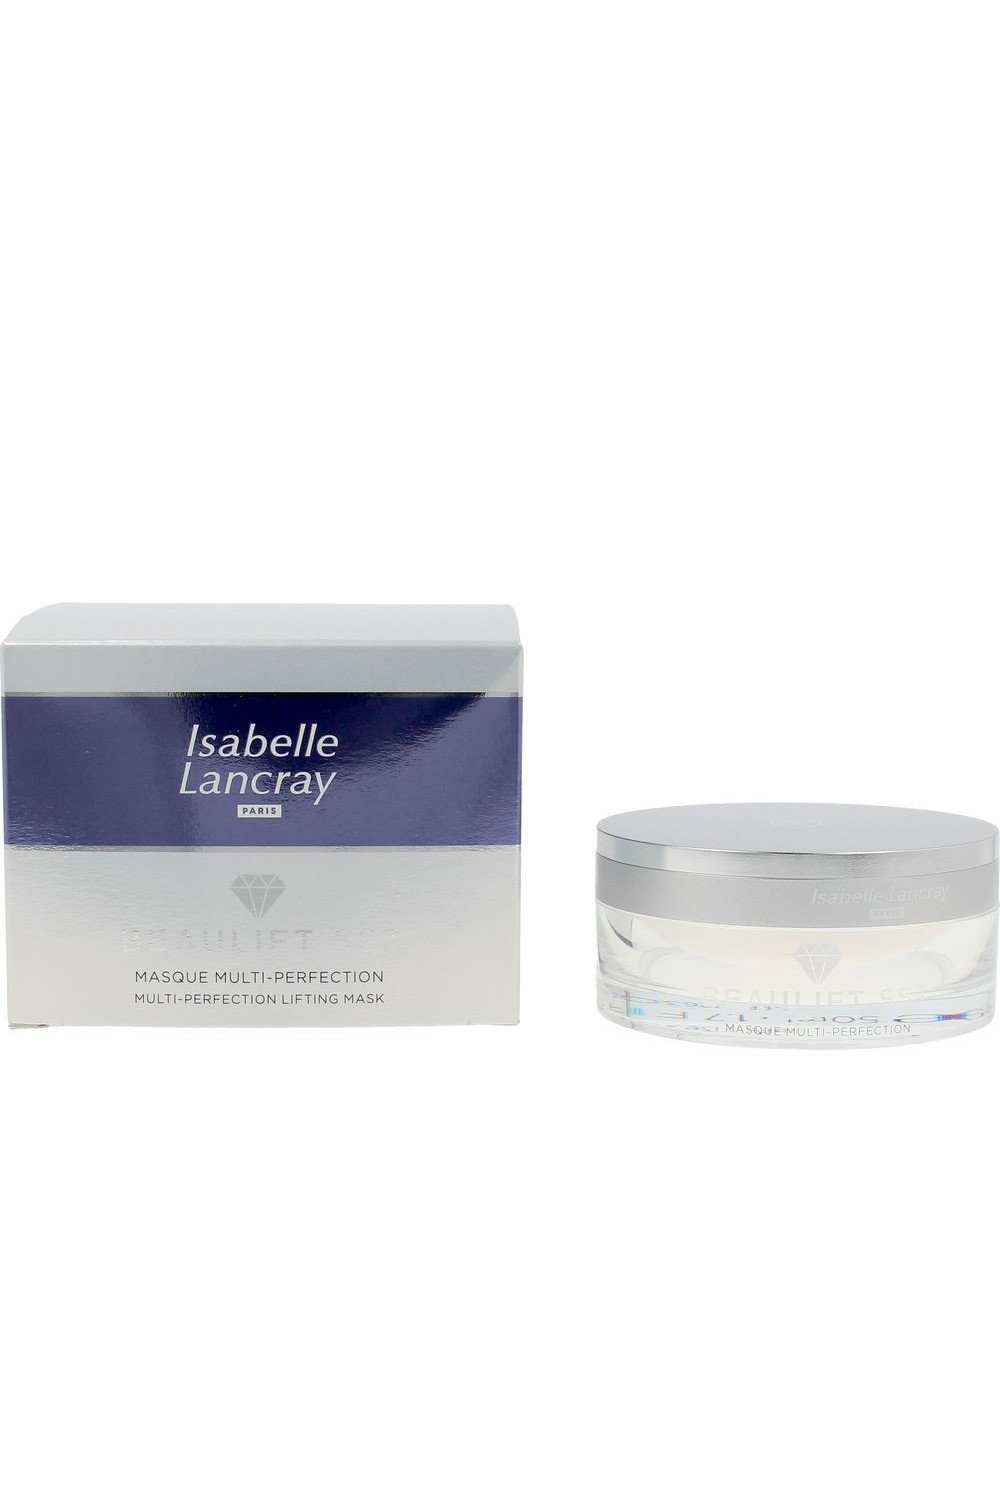 Isabelle Lancray Beaulift Masque Multi-Perfection 50ml